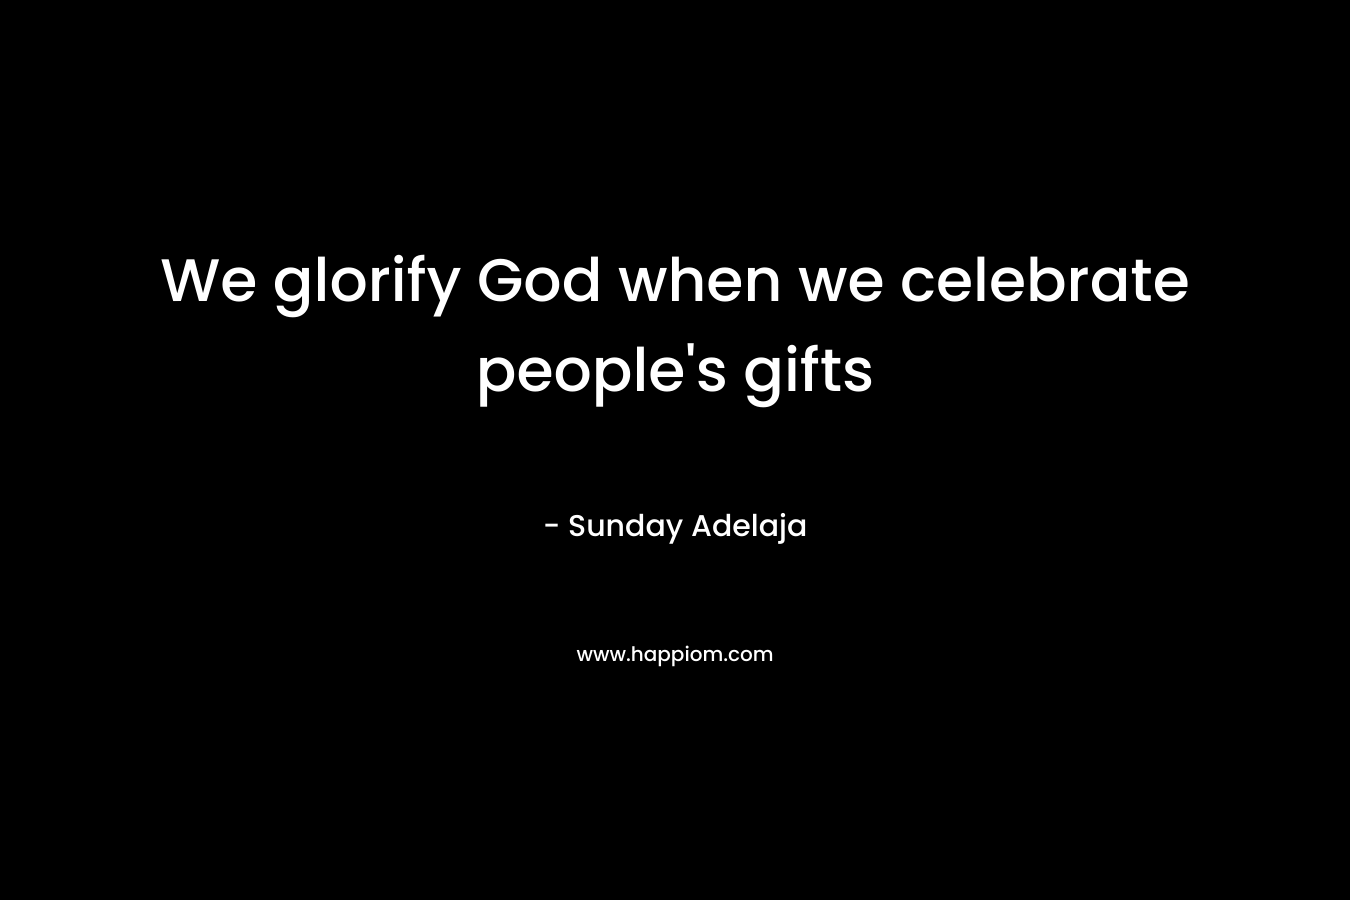 We glorify God when we celebrate people's gifts